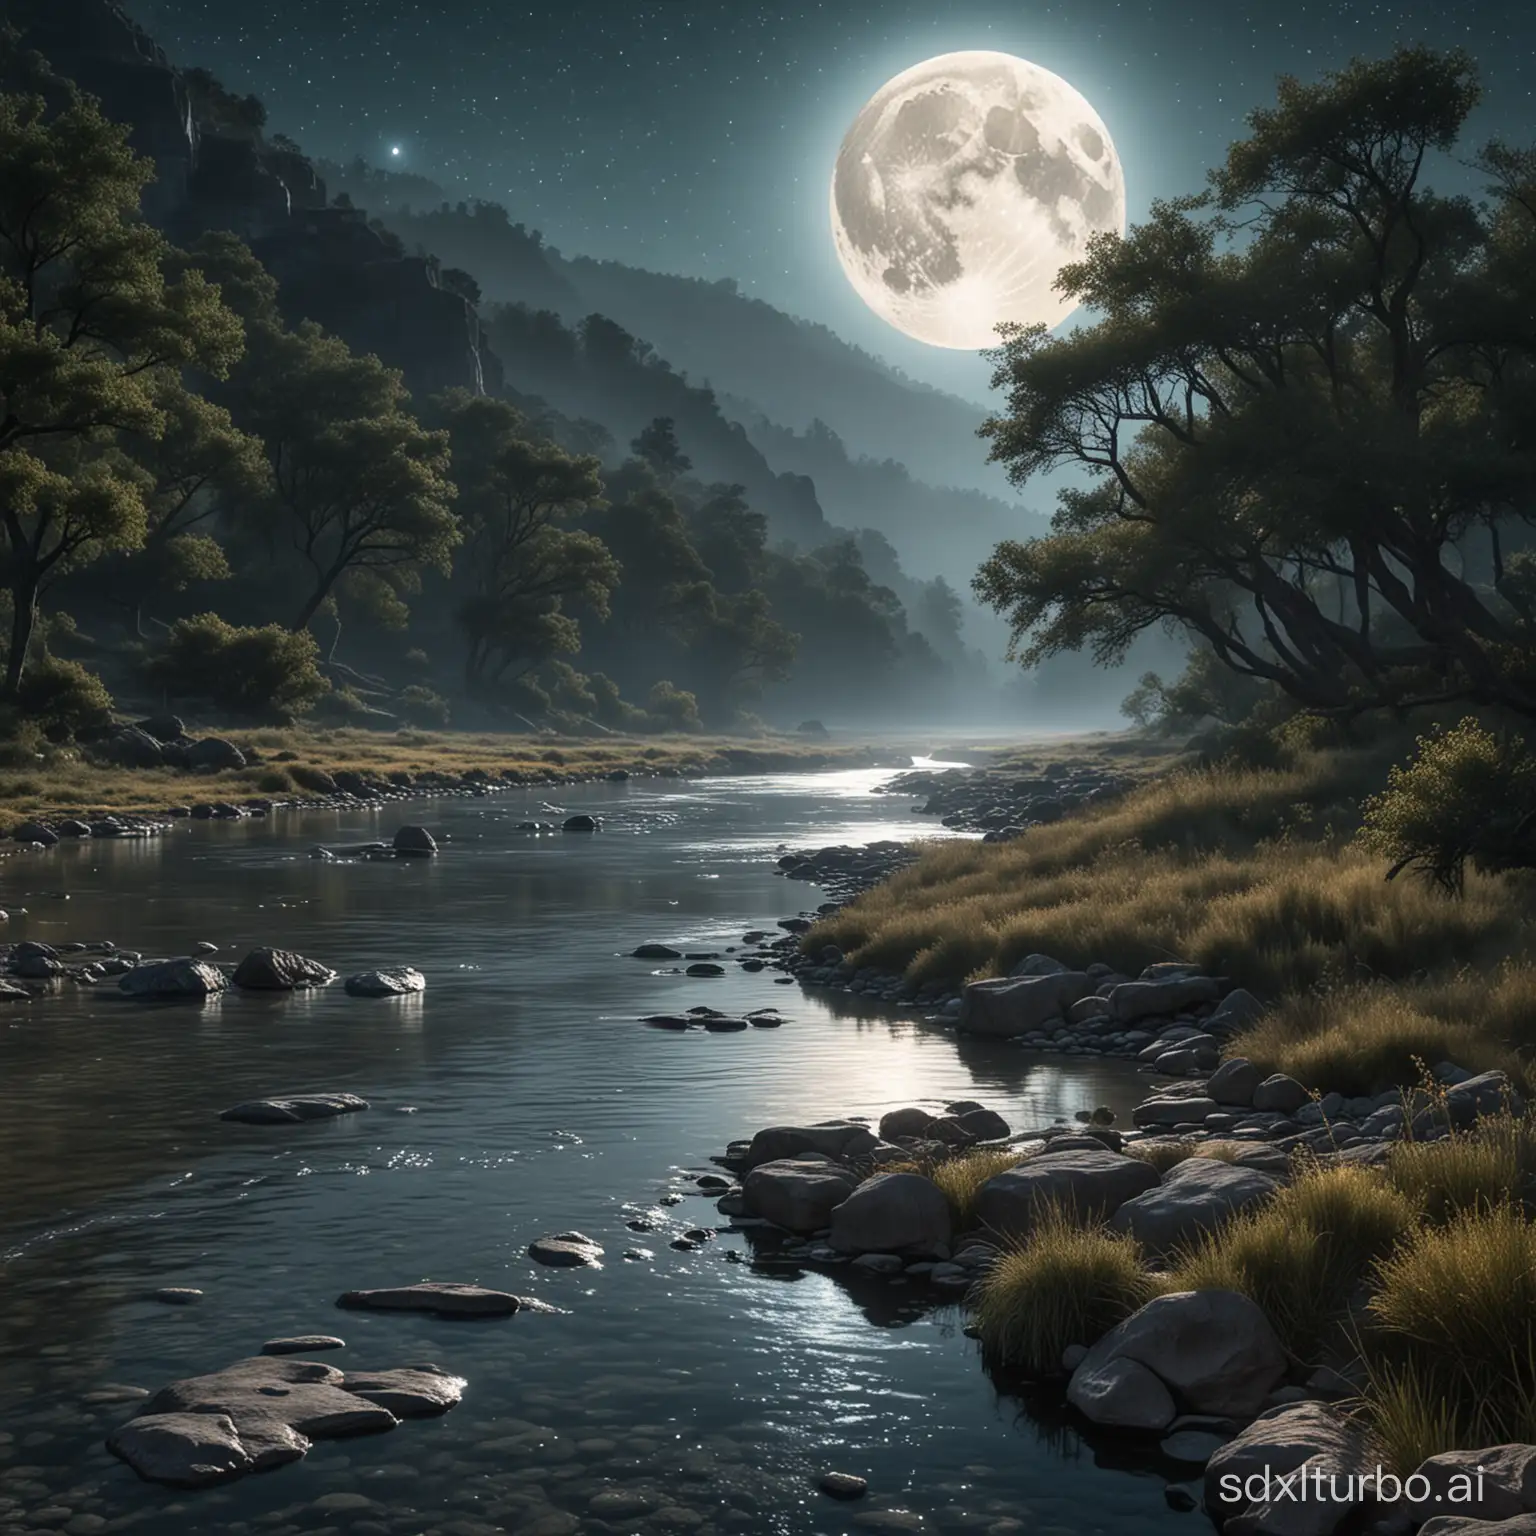 A shimmering river dances beneath the ancient moon.